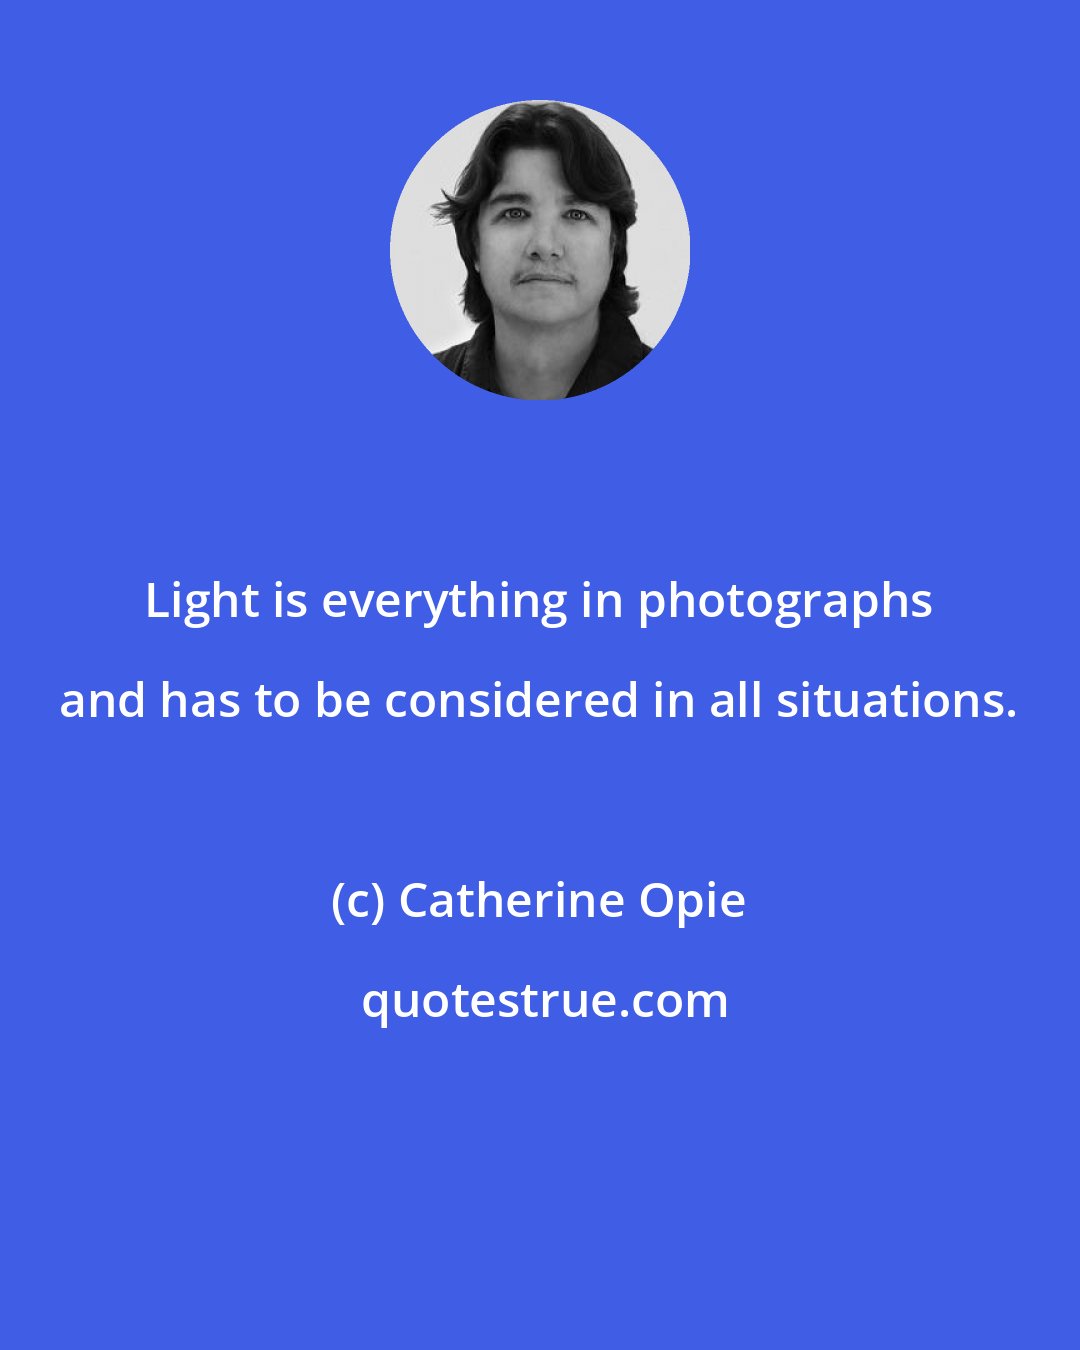 Catherine Opie: Light is everything in photographs and has to be considered in all situations.